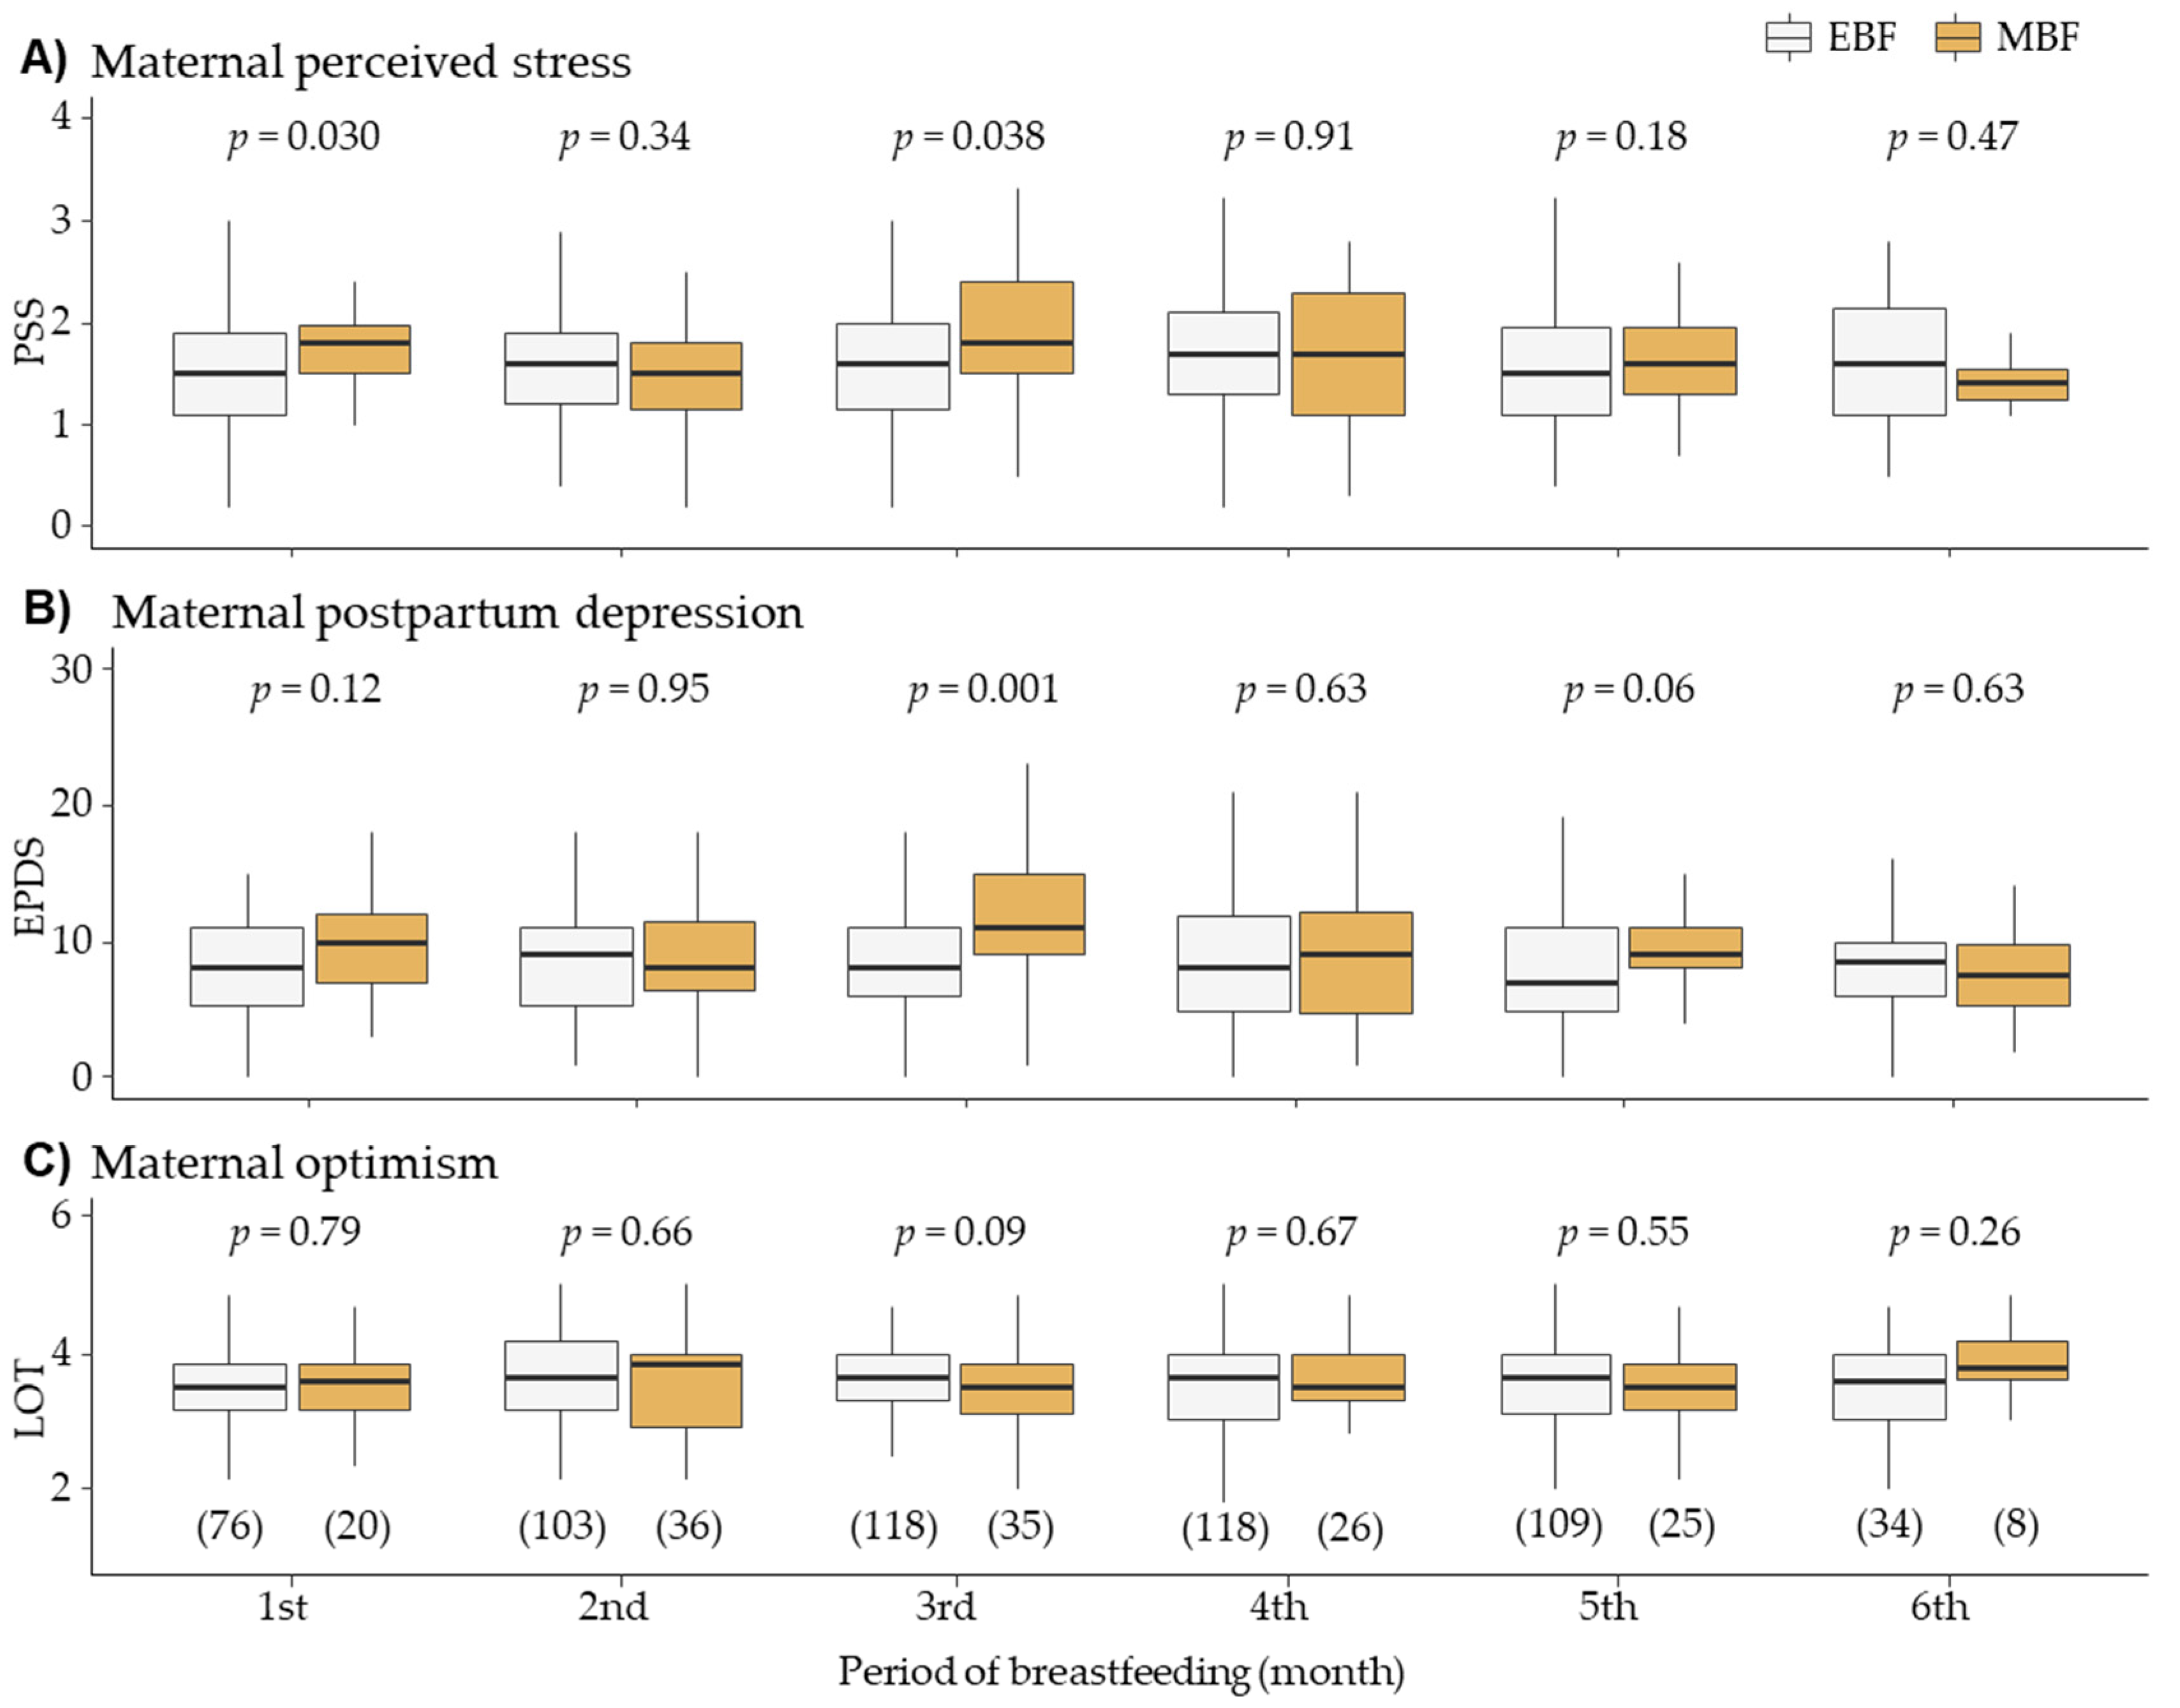 Association between Maternal Postpartum Depression, Stress, Optimism, and Breastfeeding Pattern in the First Six Months